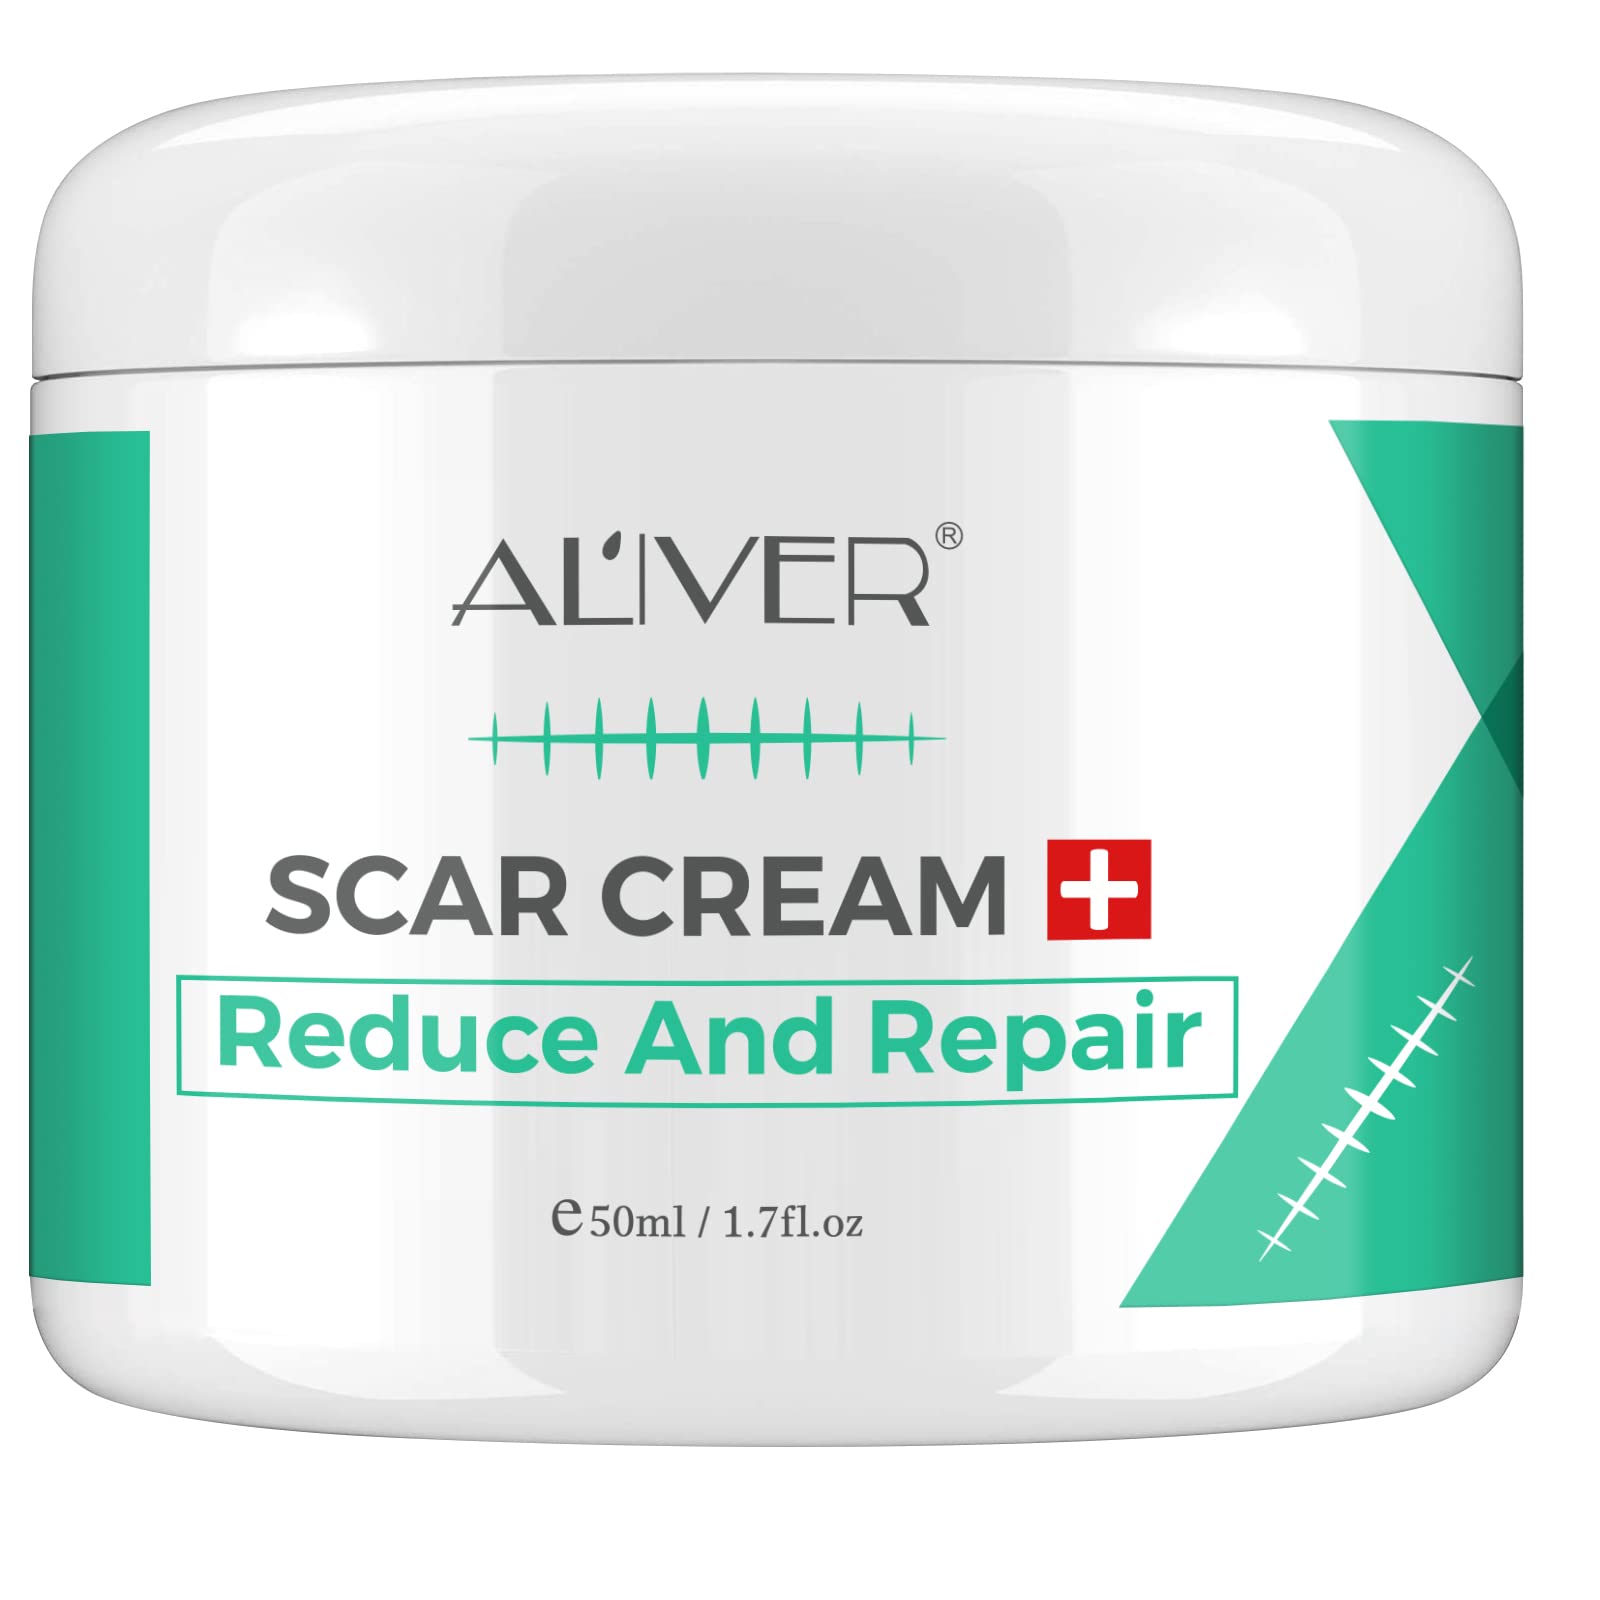 How to Remove Scars on Legs: Creams, Home Remedies, & More